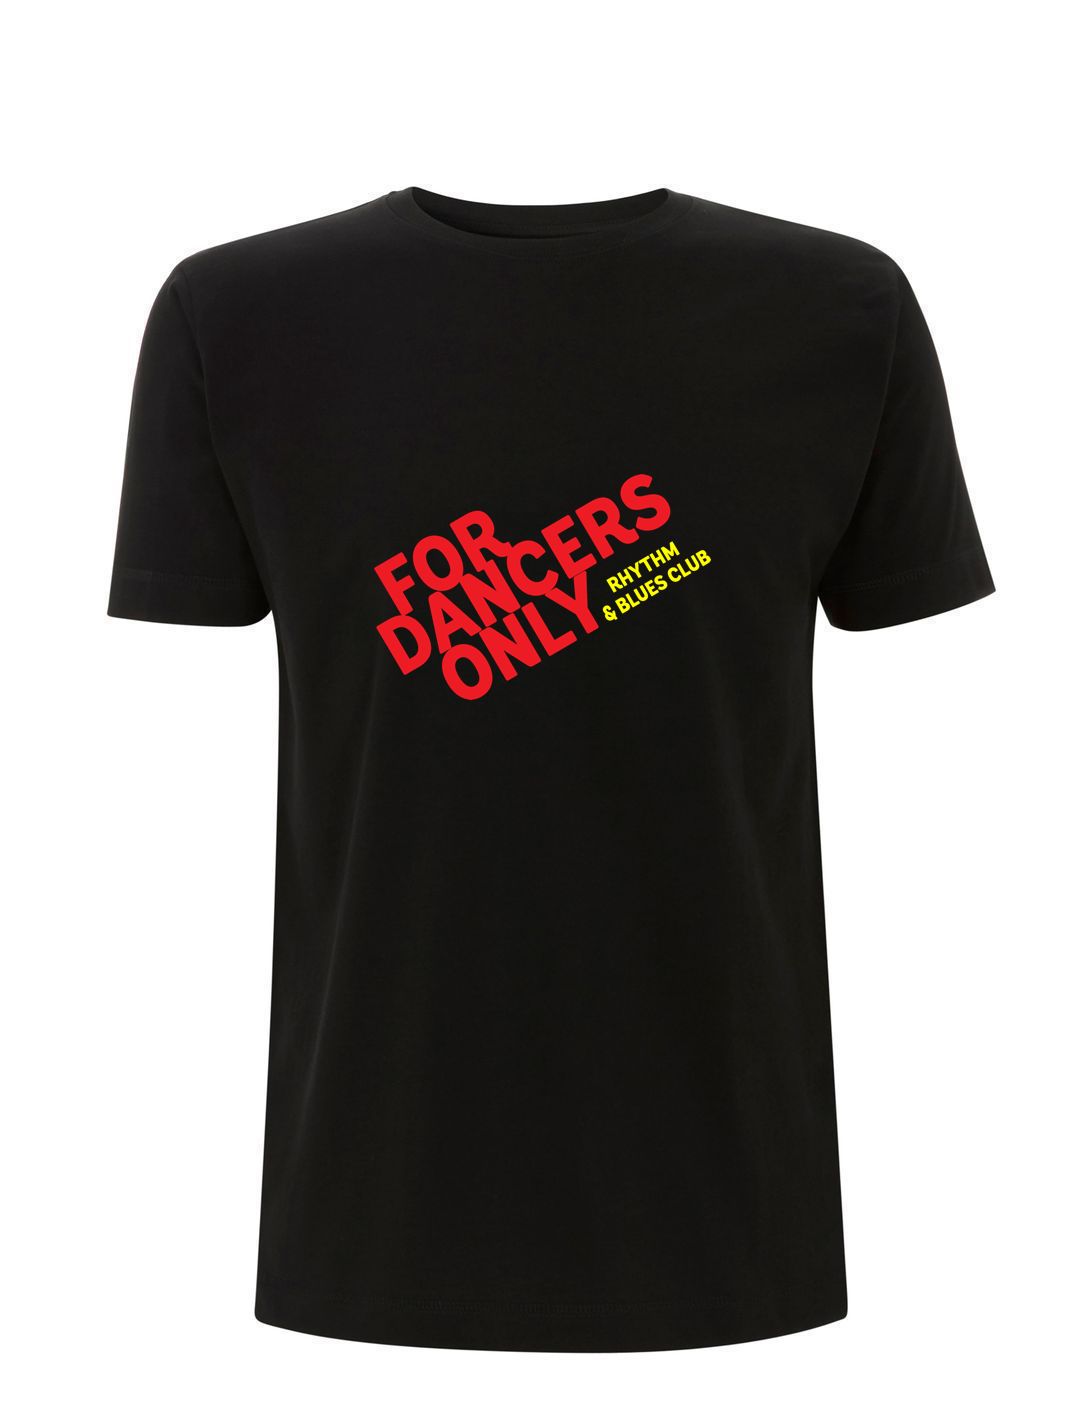 For Dancers Only - CLASSIC CLUB RANGE: Premium Organic T-Shirt (3 Colours) - Suit Yourself Music